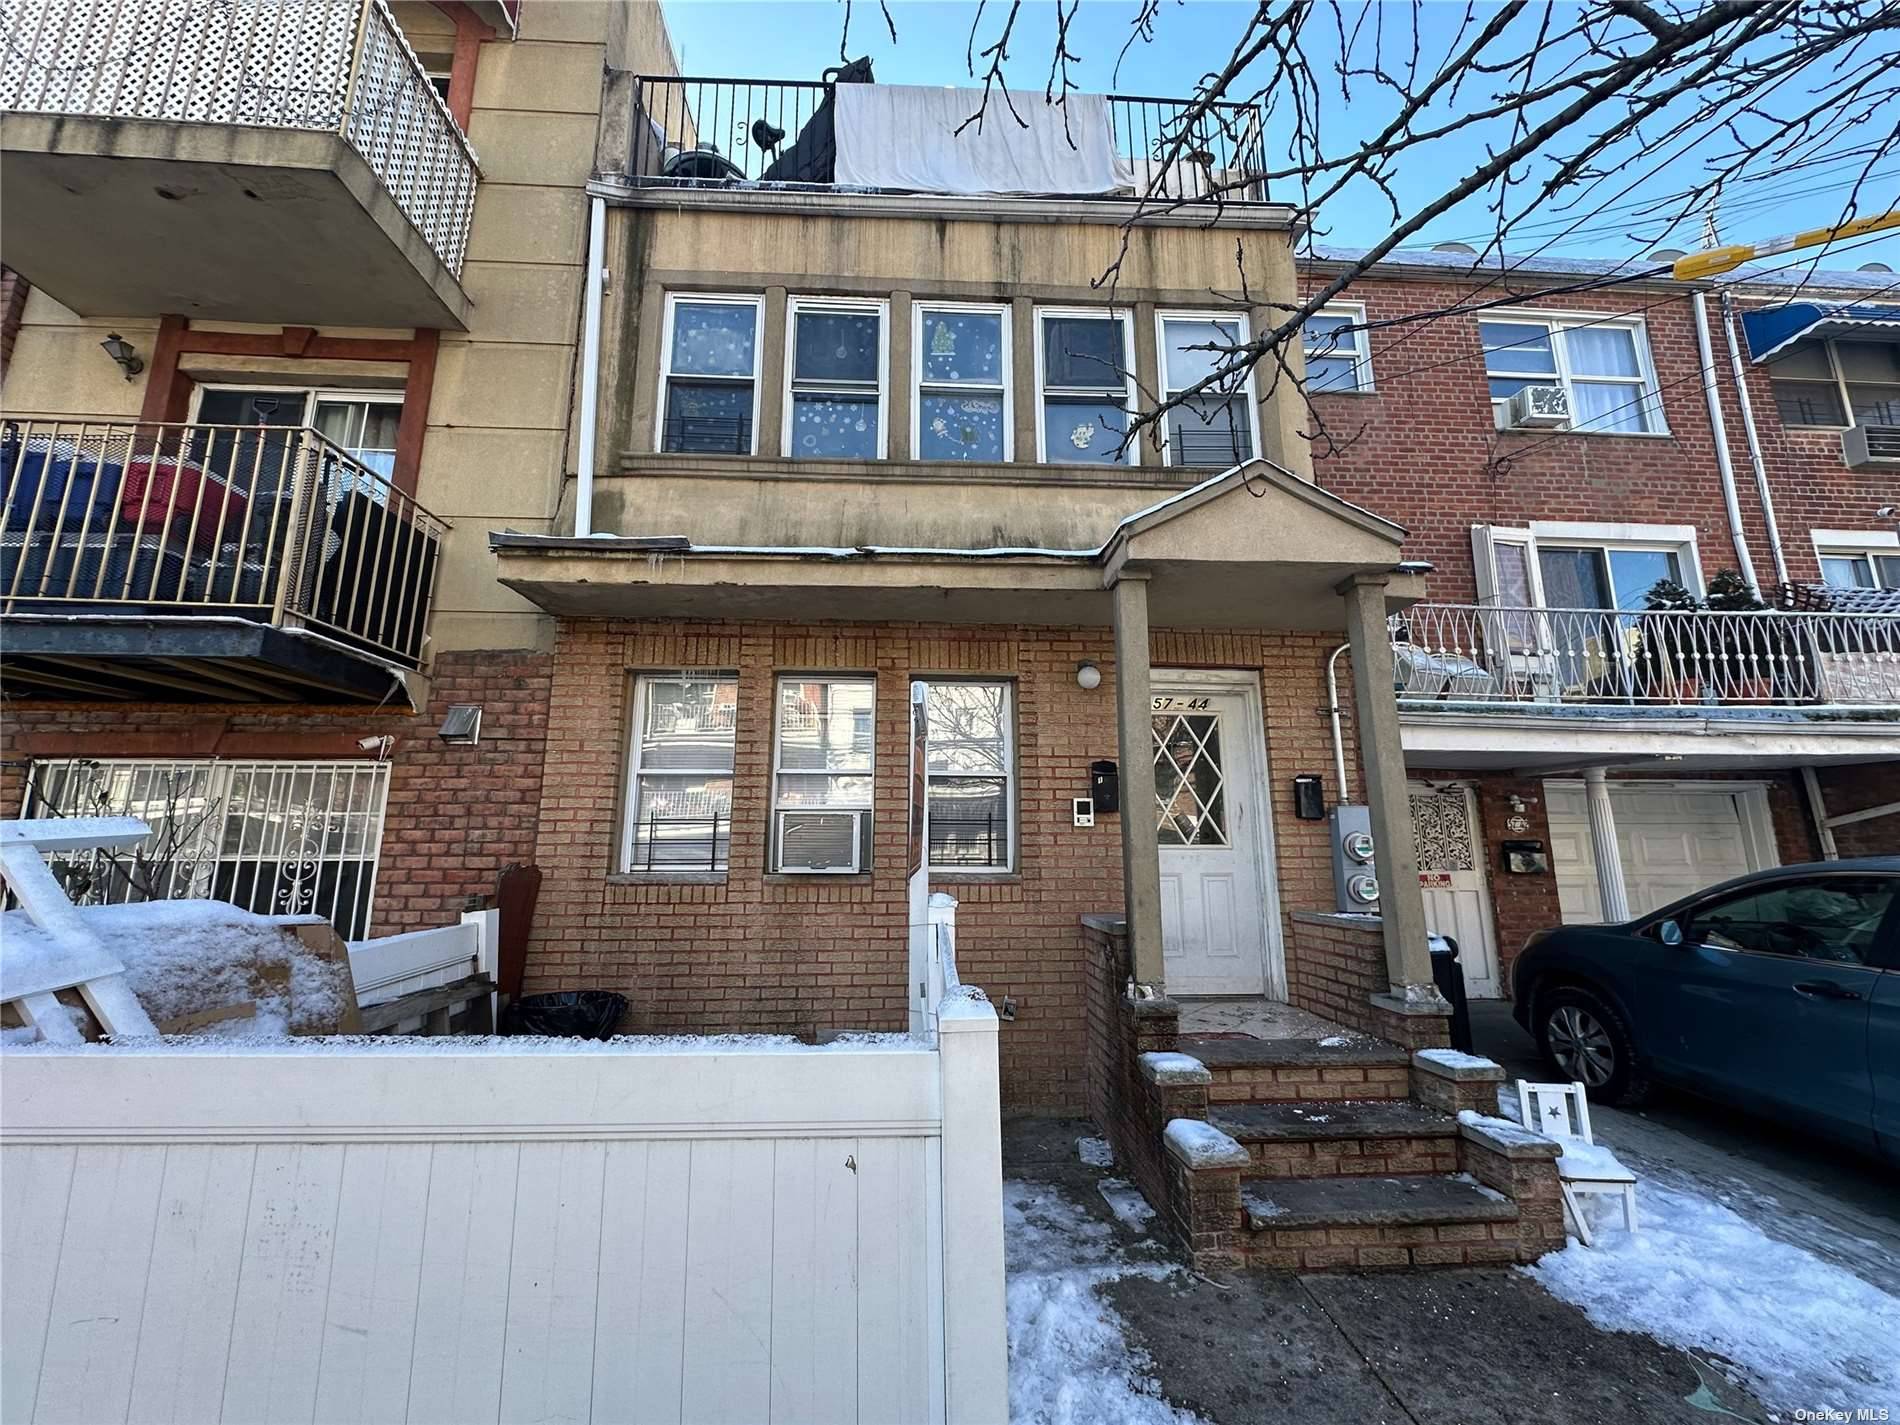 A Beautiful Legal 2 Family Home in Prime Corona, Queens Location.